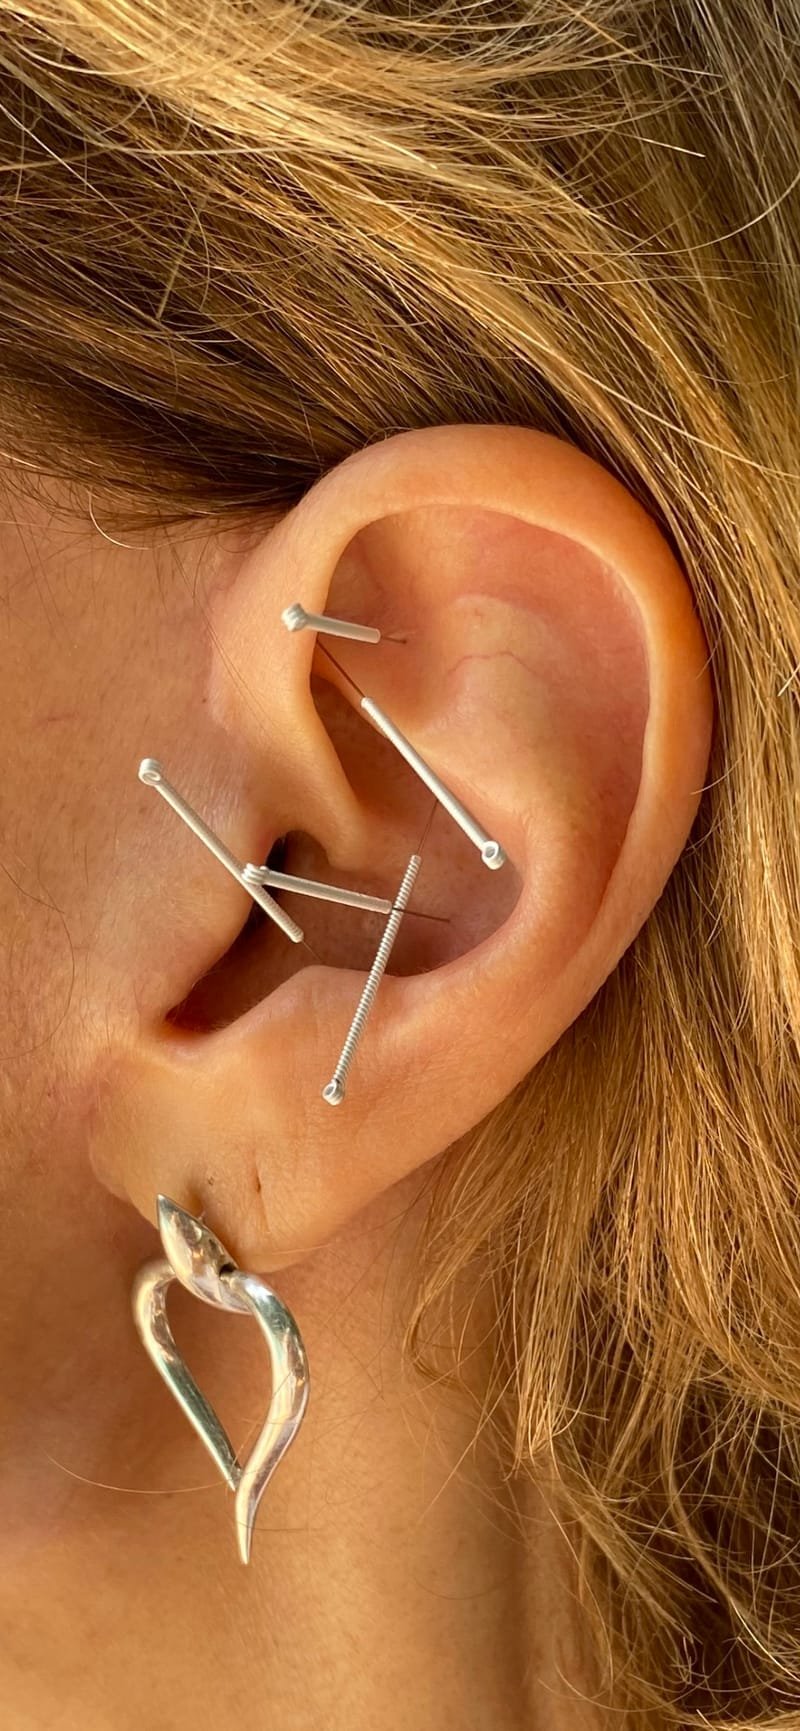 Ear Acupuncture Trial Sessions